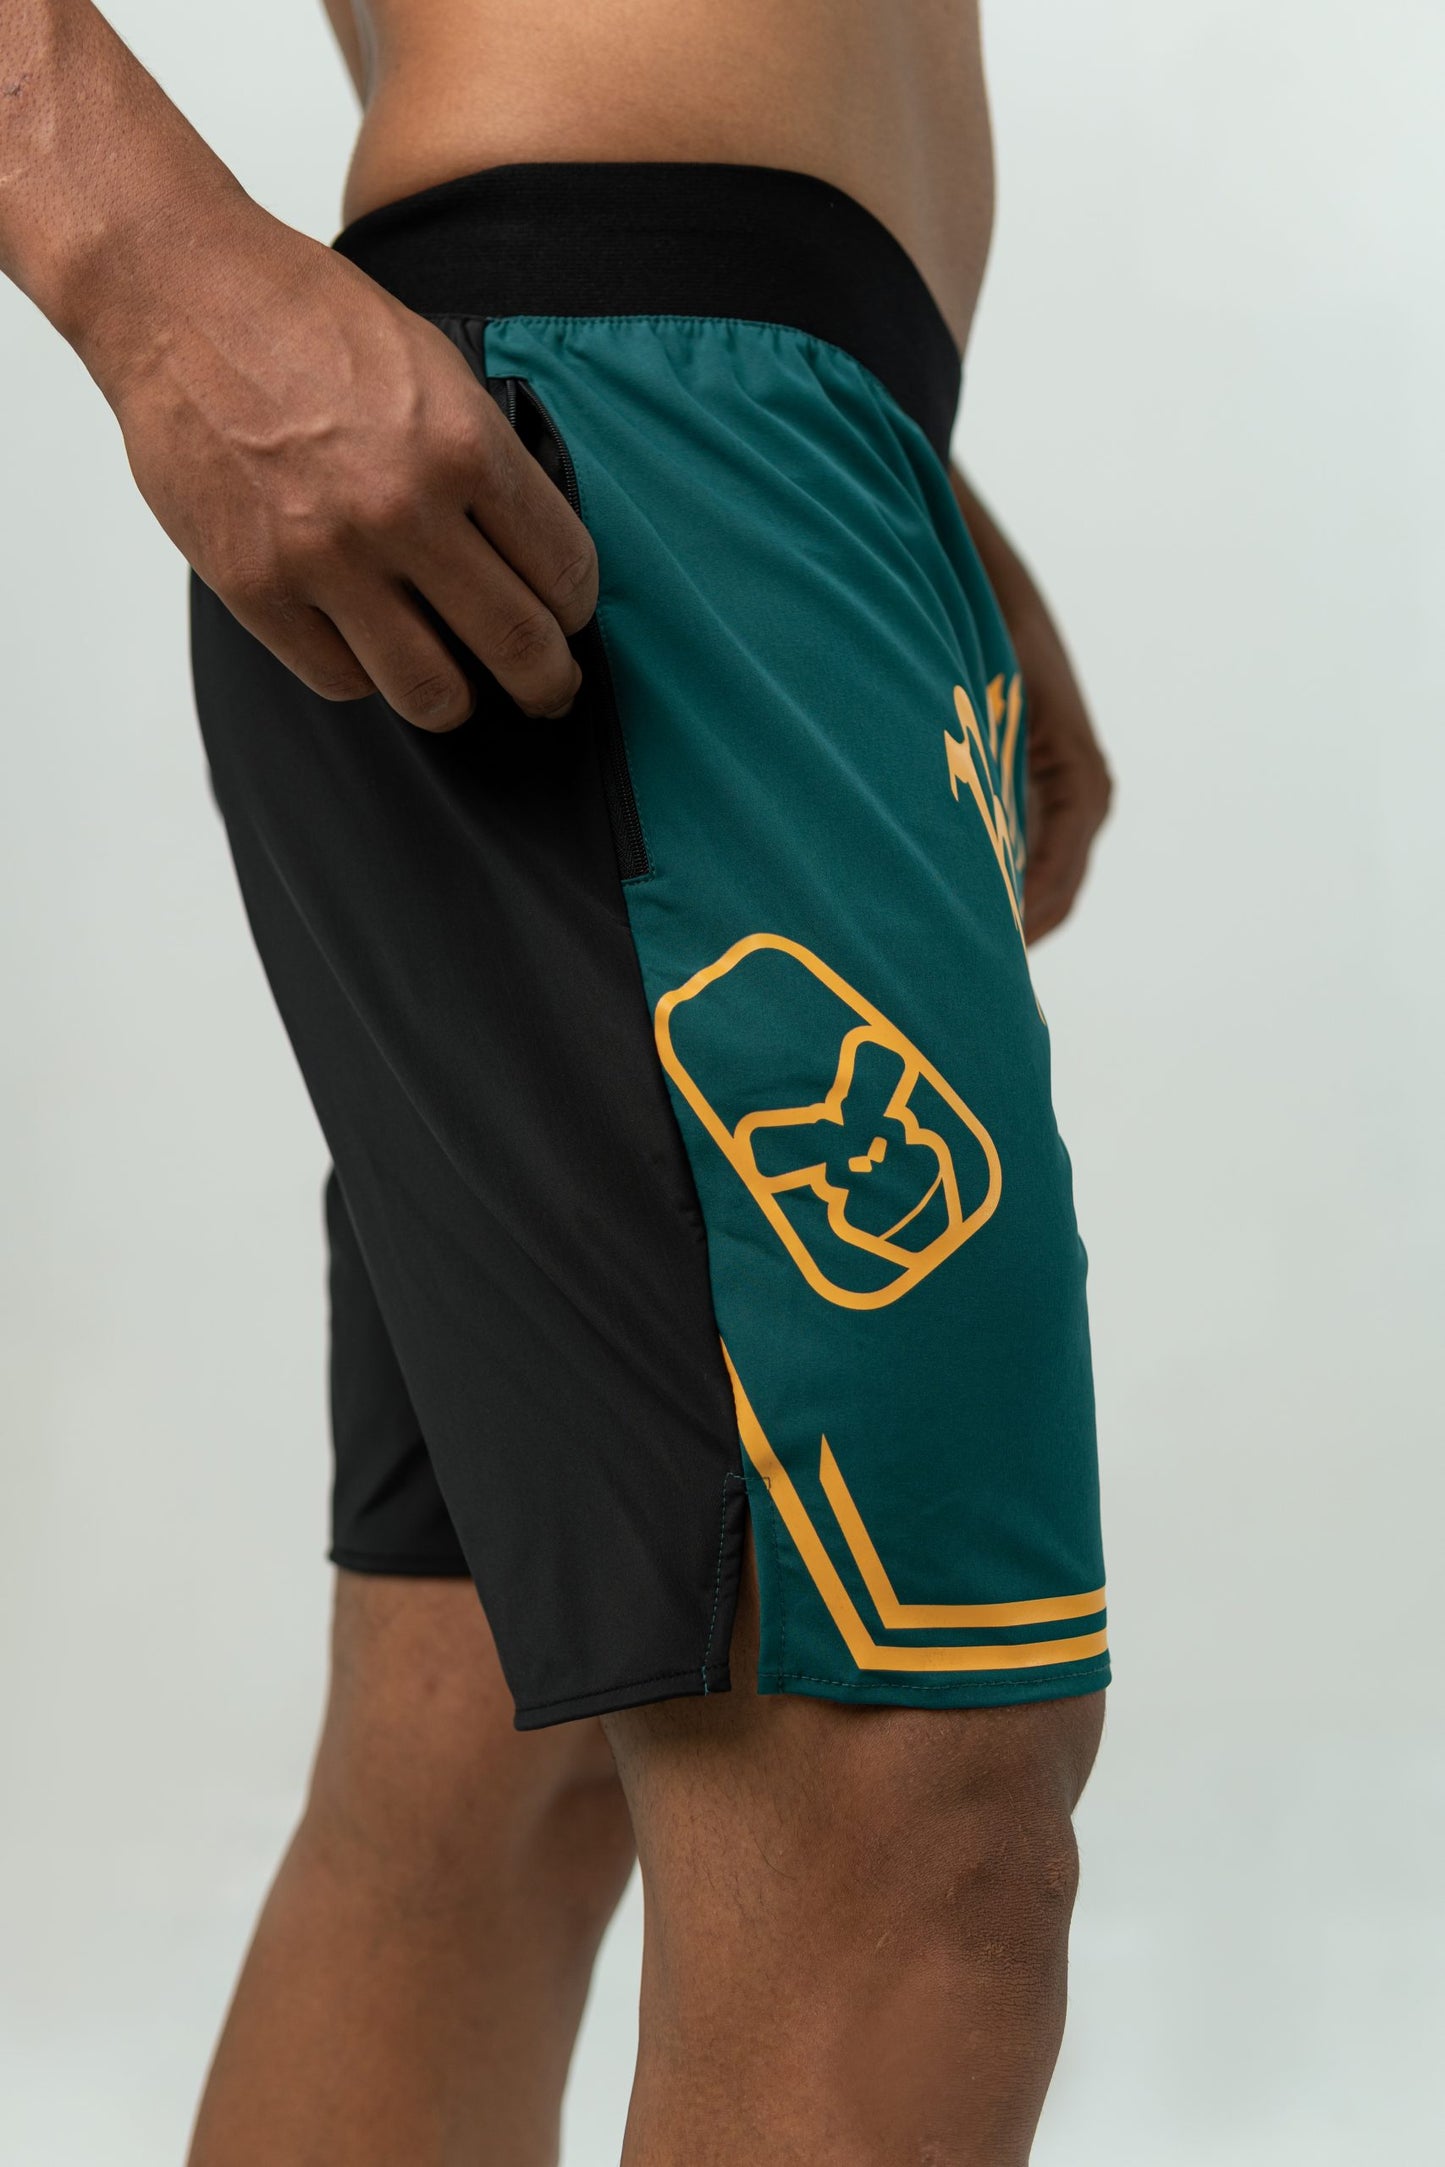 'BE YOUR RULES' UNISEX TEAL SHORTS